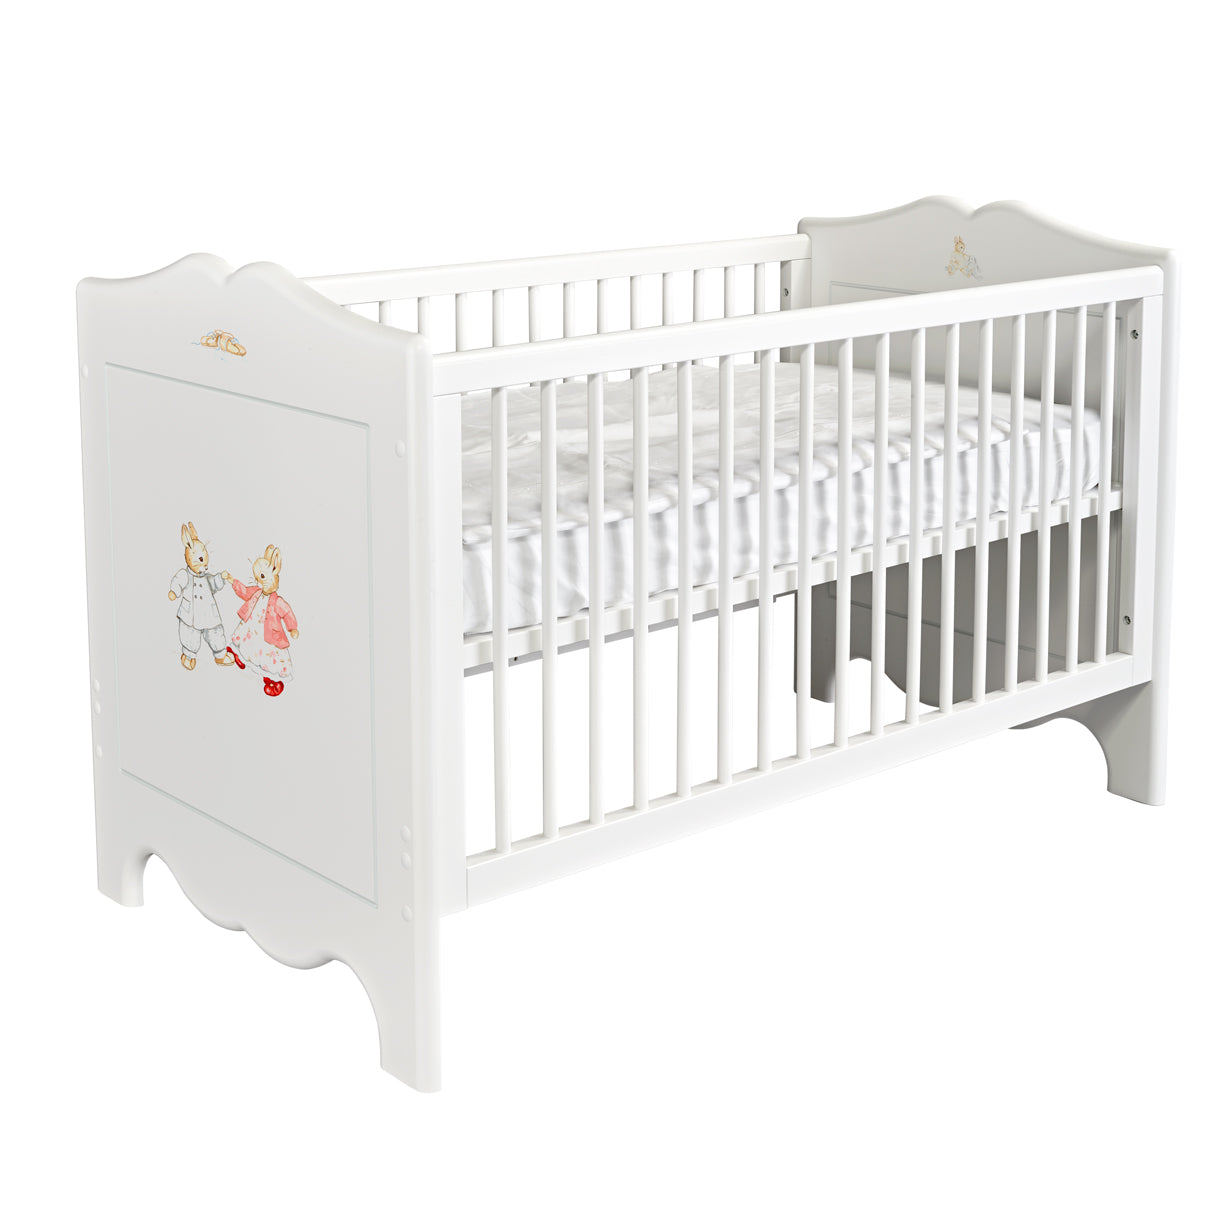 Dragons Cot Bed - Designer Bunnies with Chic Grey Trim